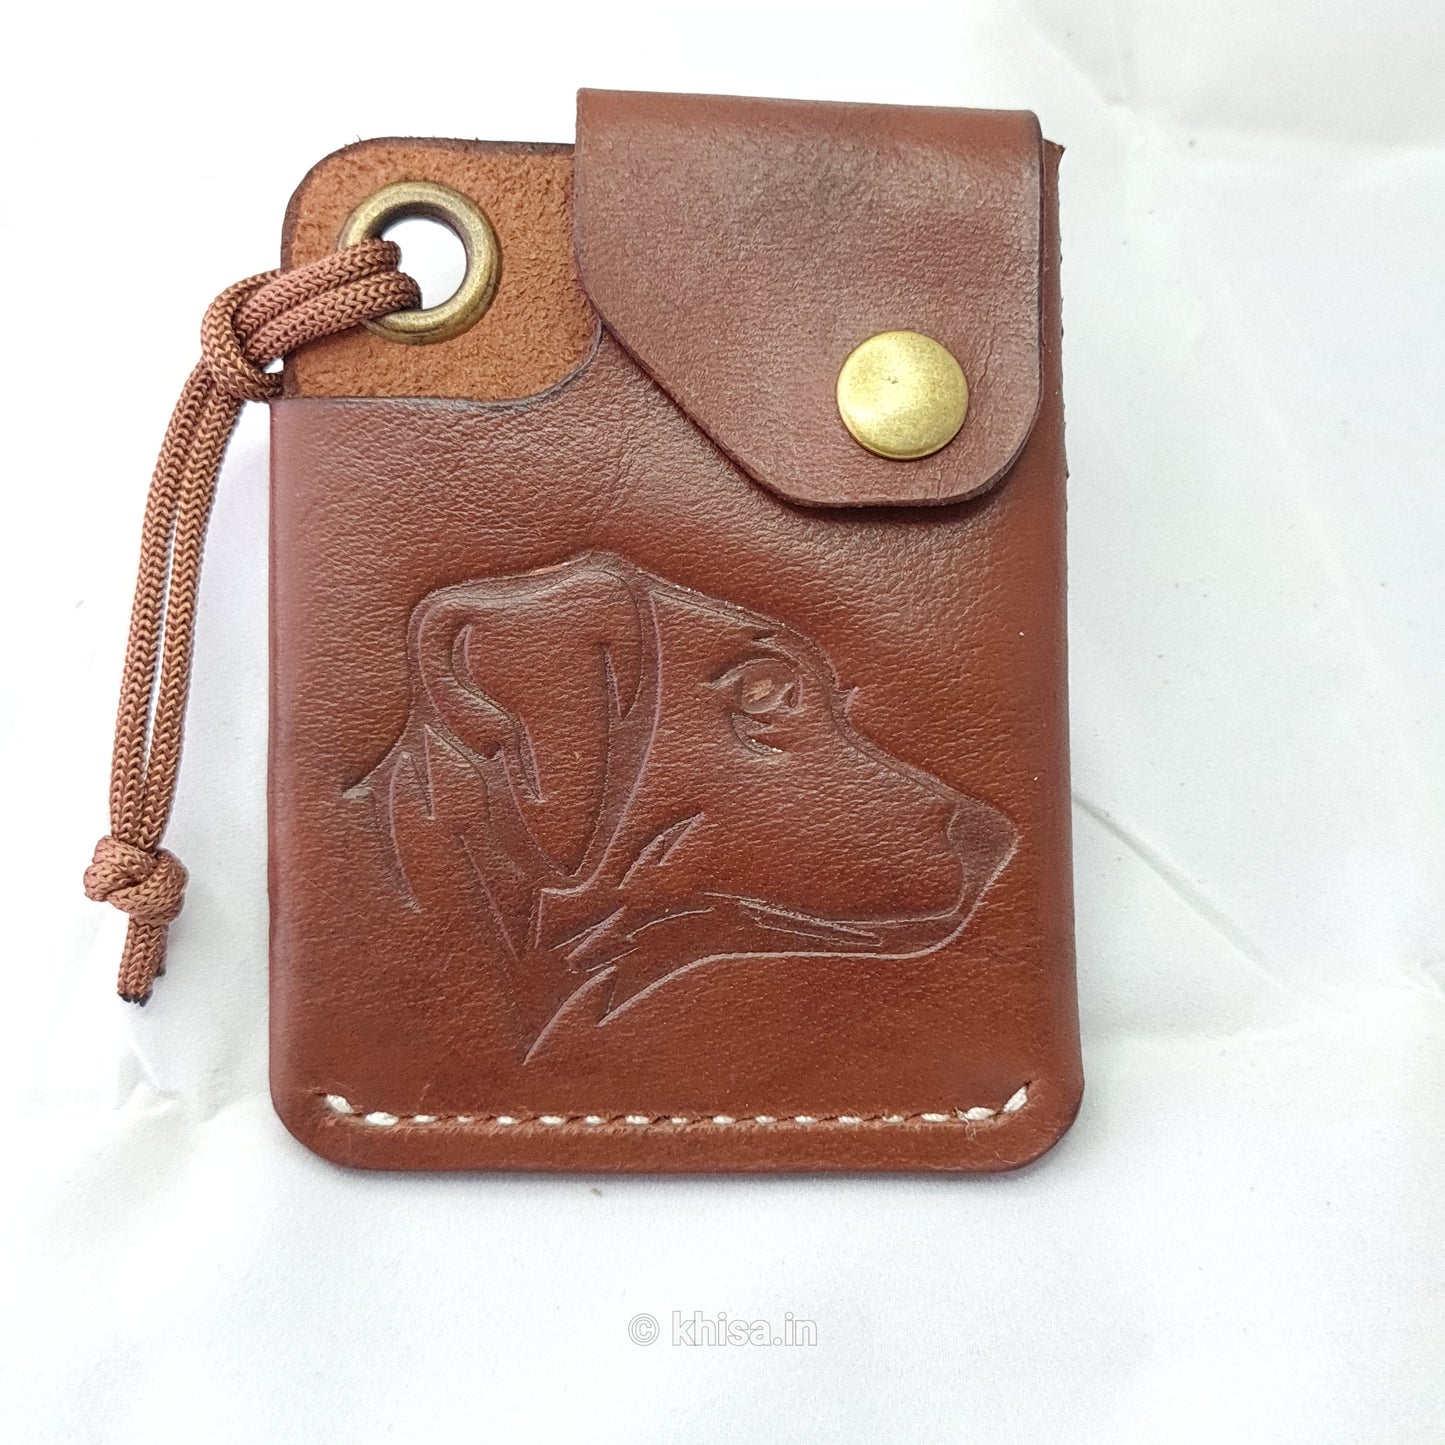 EDC Wallet - Love Your Dog